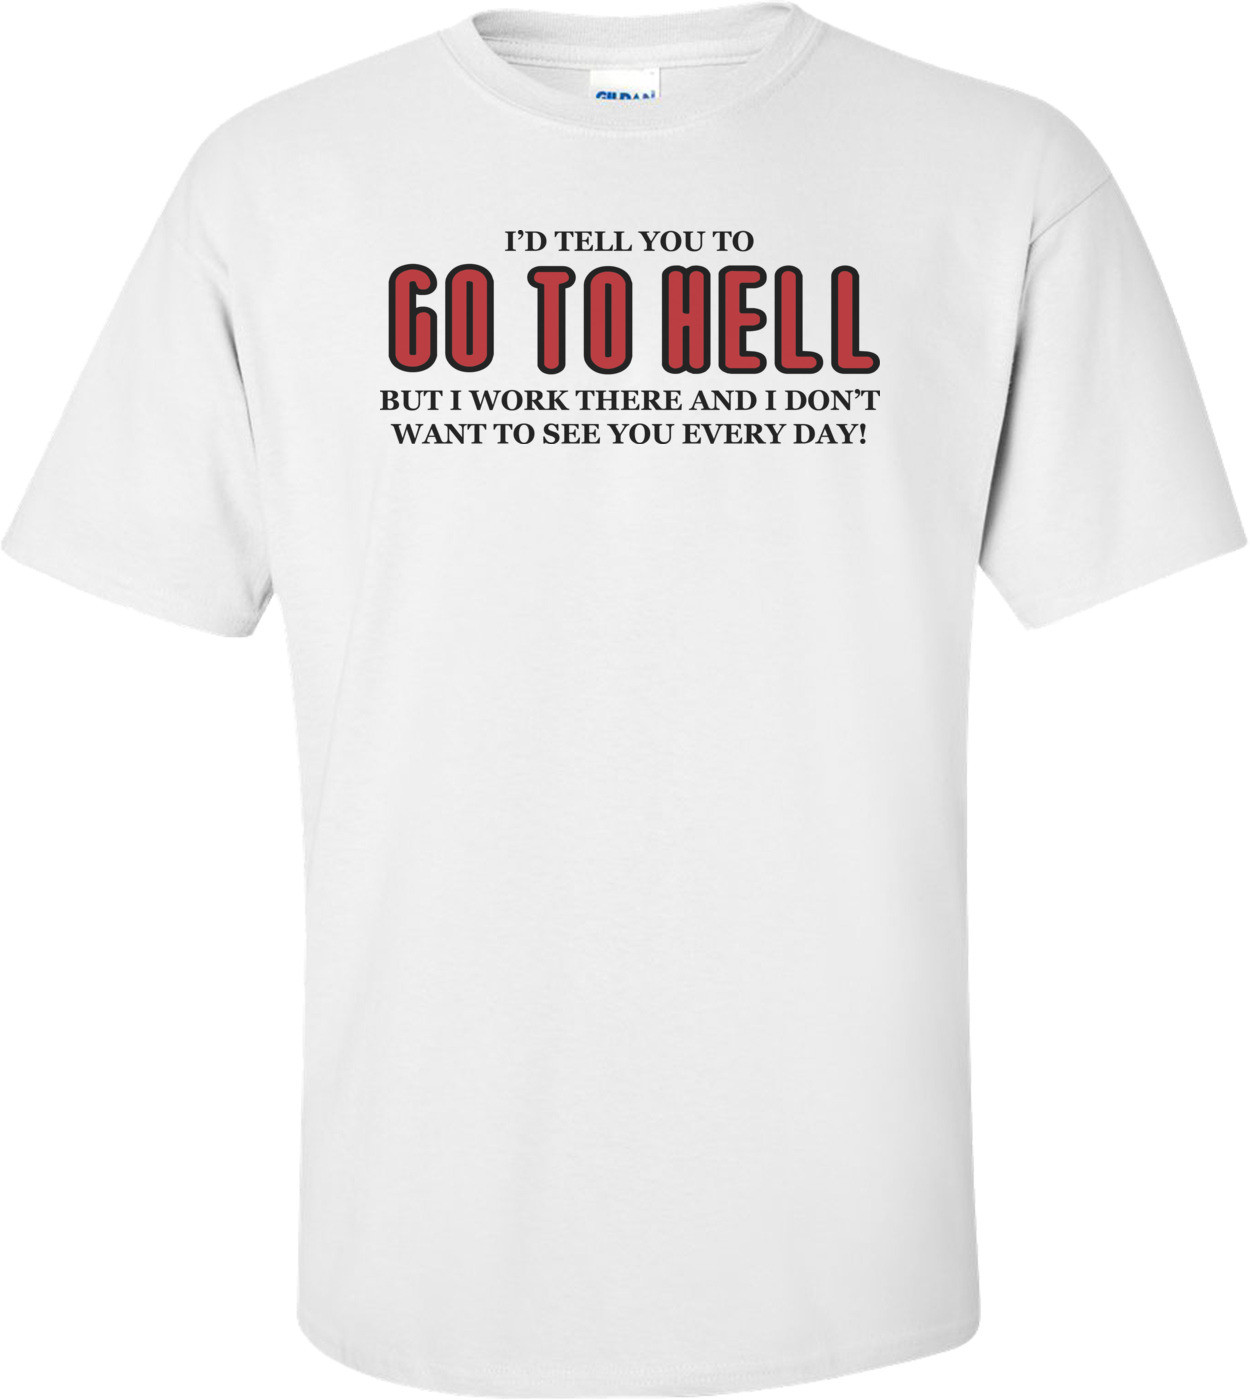 I'd Tell You To Go To Hell But I Work There And I Don't Want To See You Every Day T-shirt